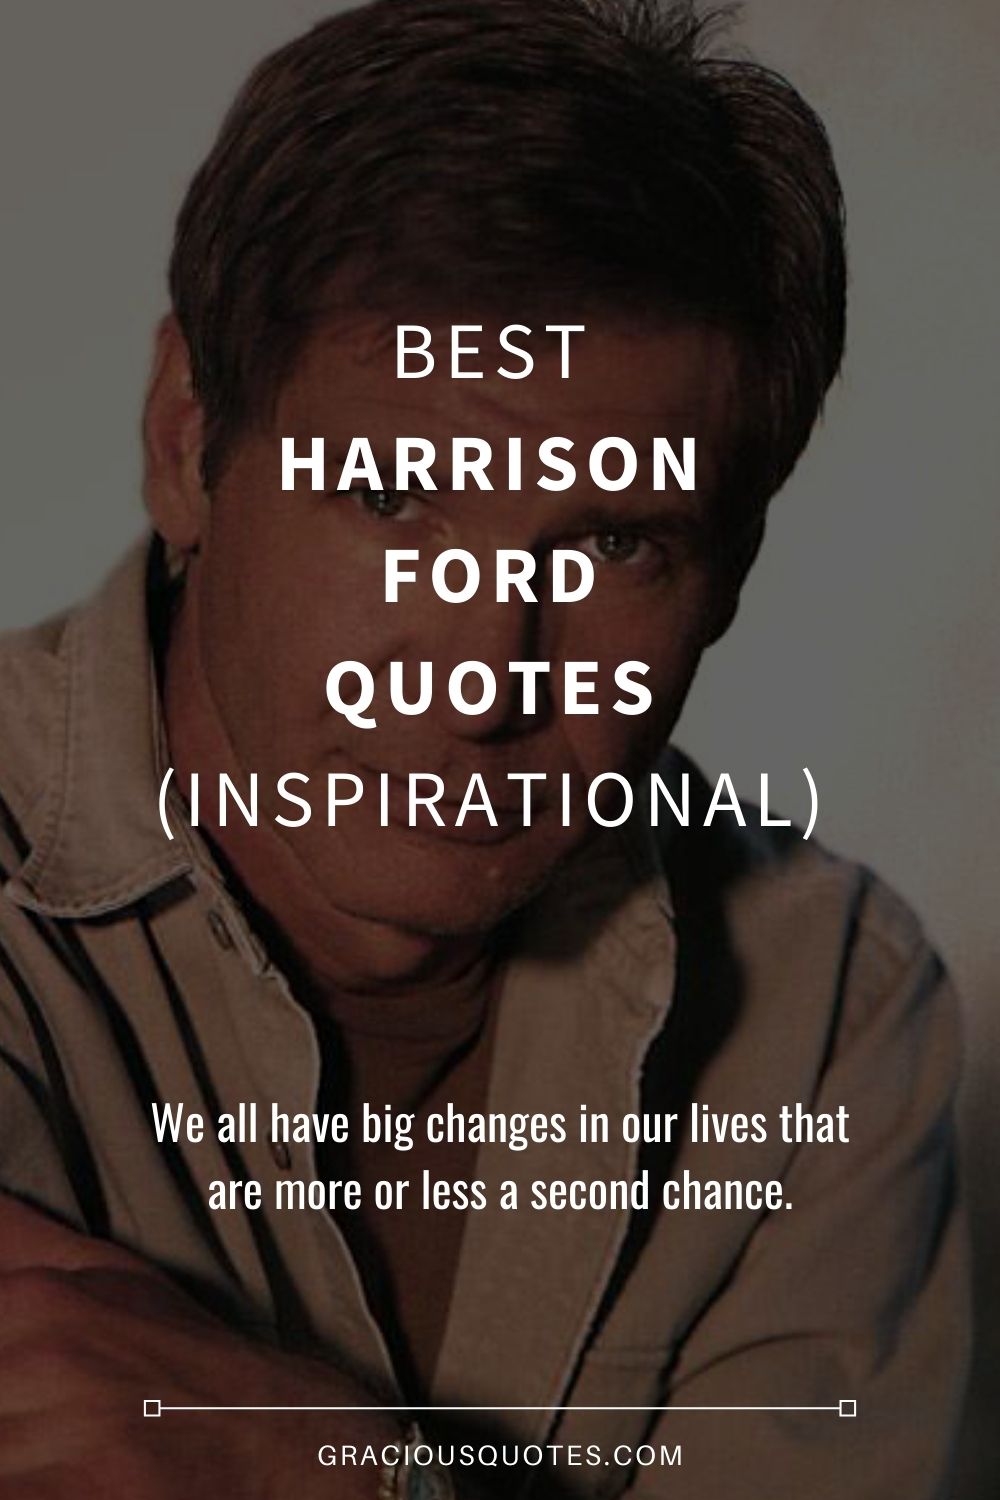 Best Harrison Ford Quotes (INSPIRATIONAL) - Gracious Quotes